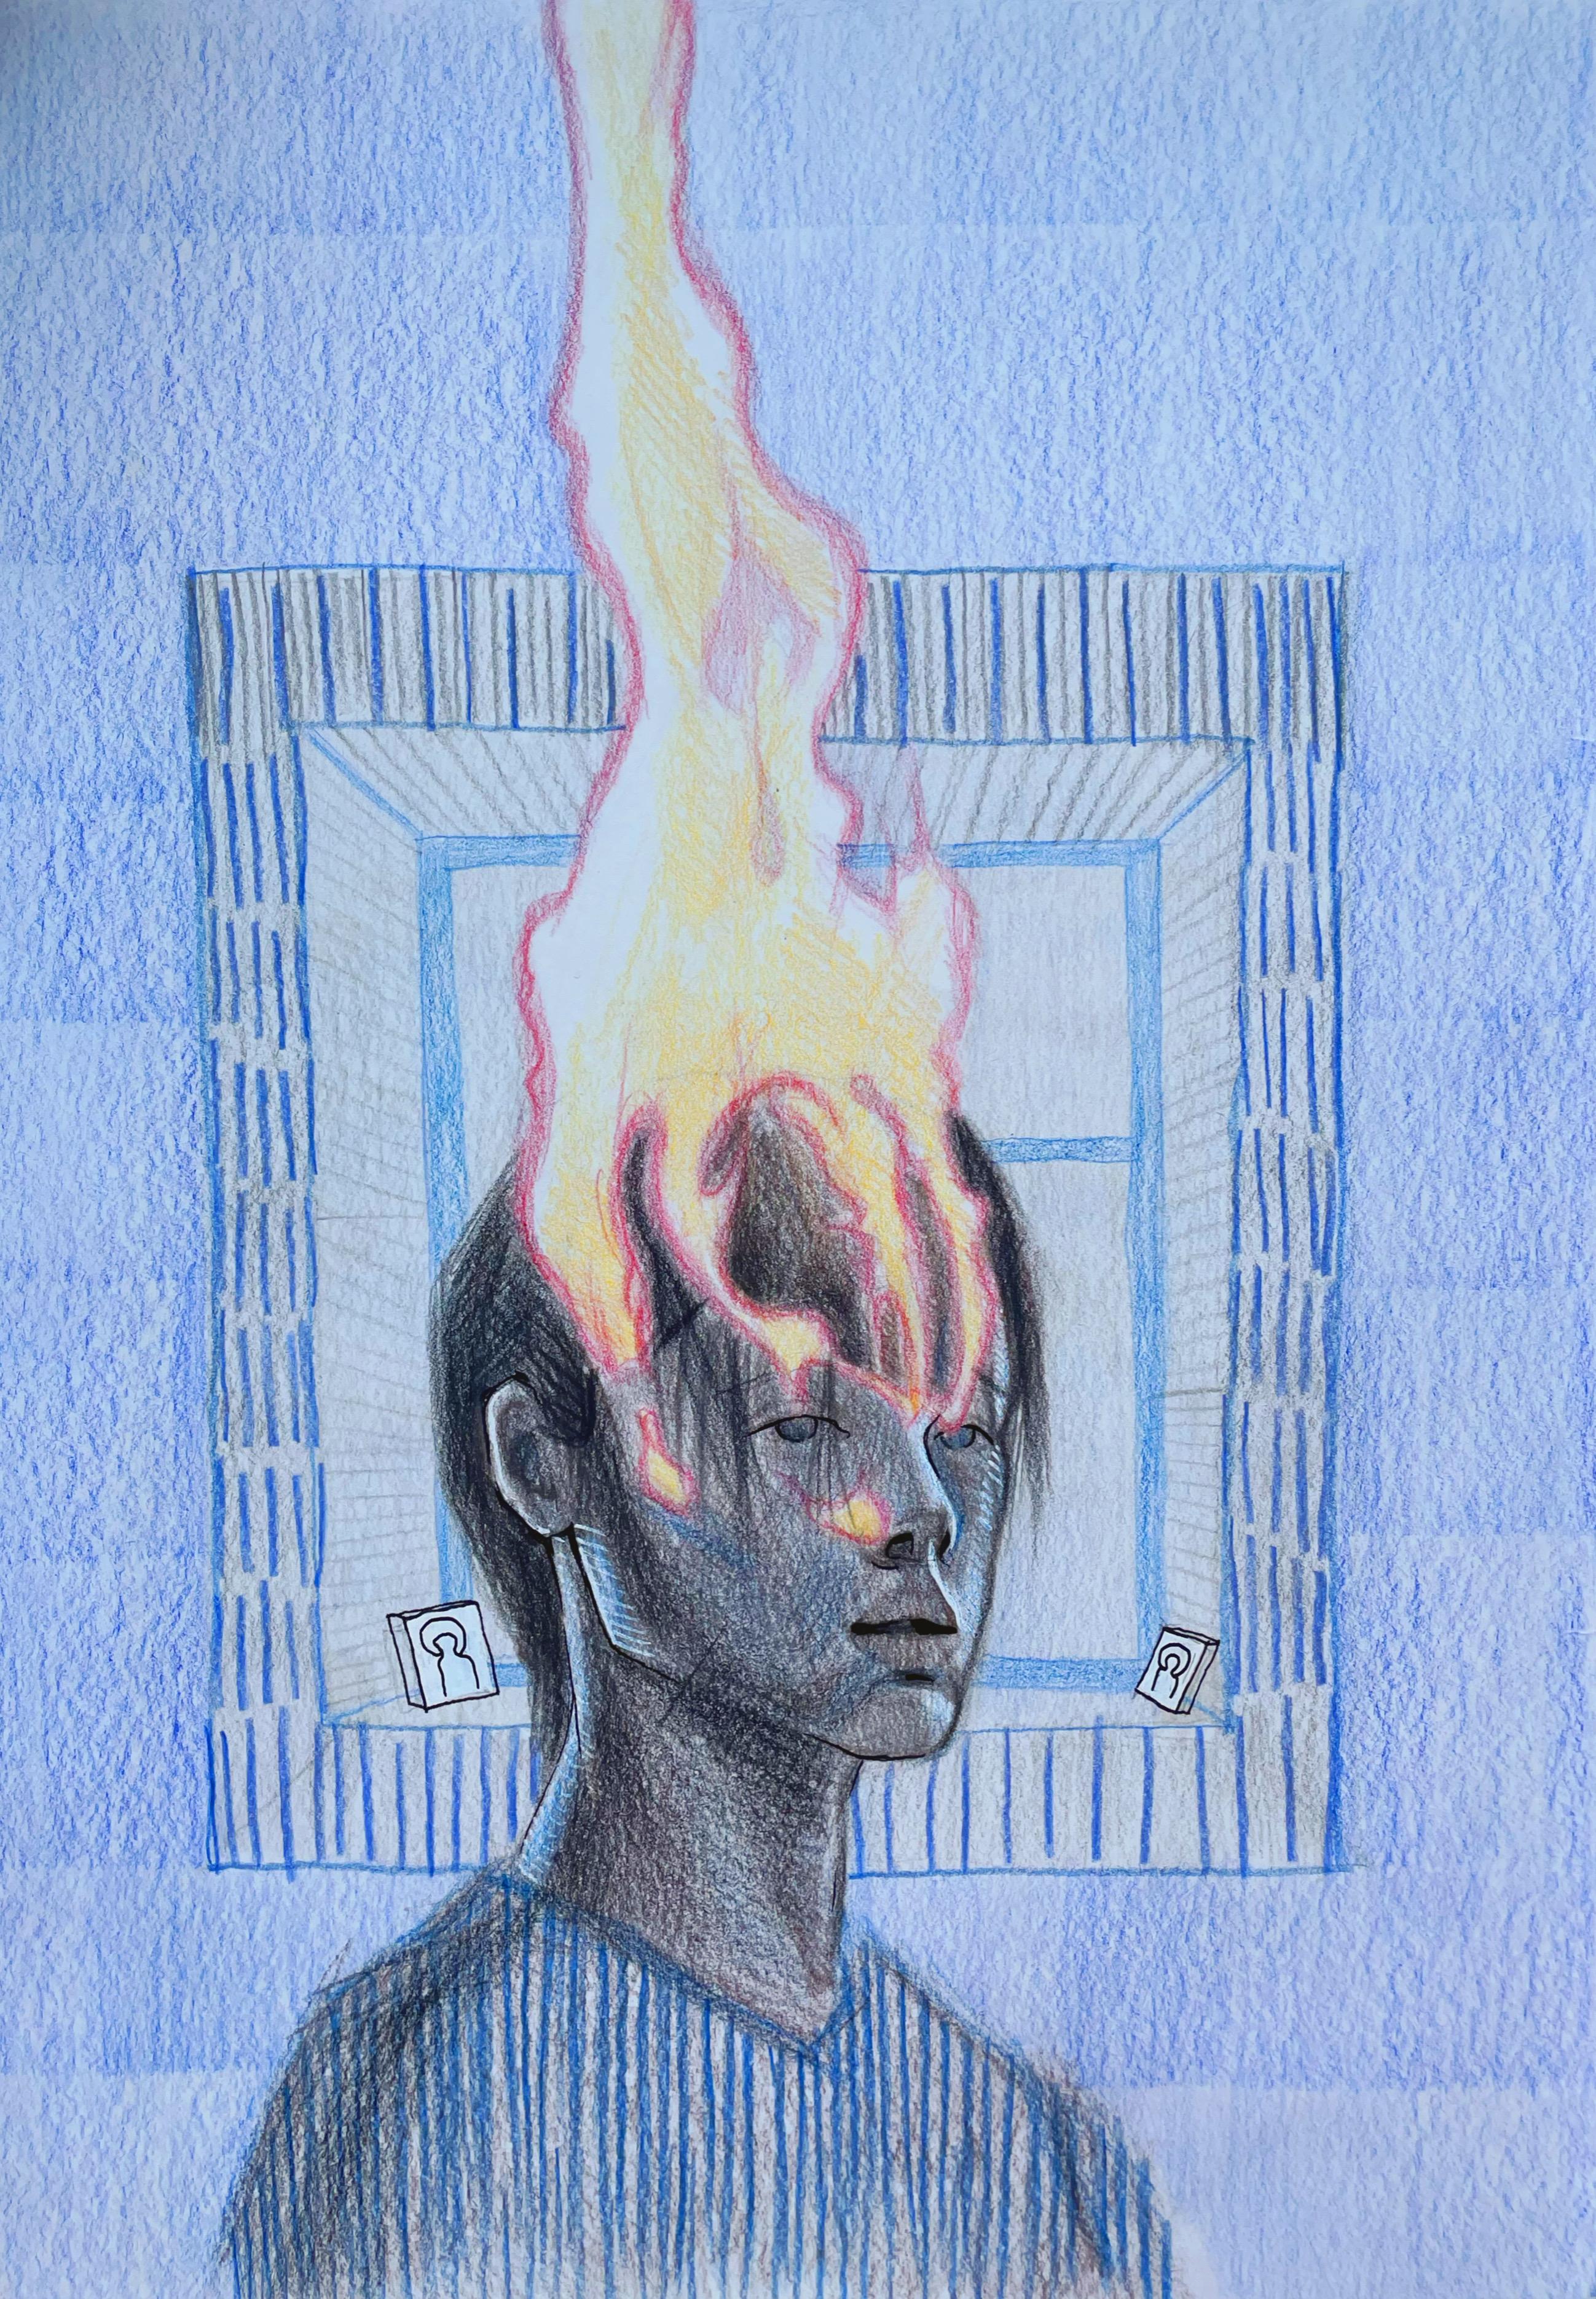 “on fire”. Colored pencils on paper. 21 х 30 cm. 2022 - Art by Polina Gulgas